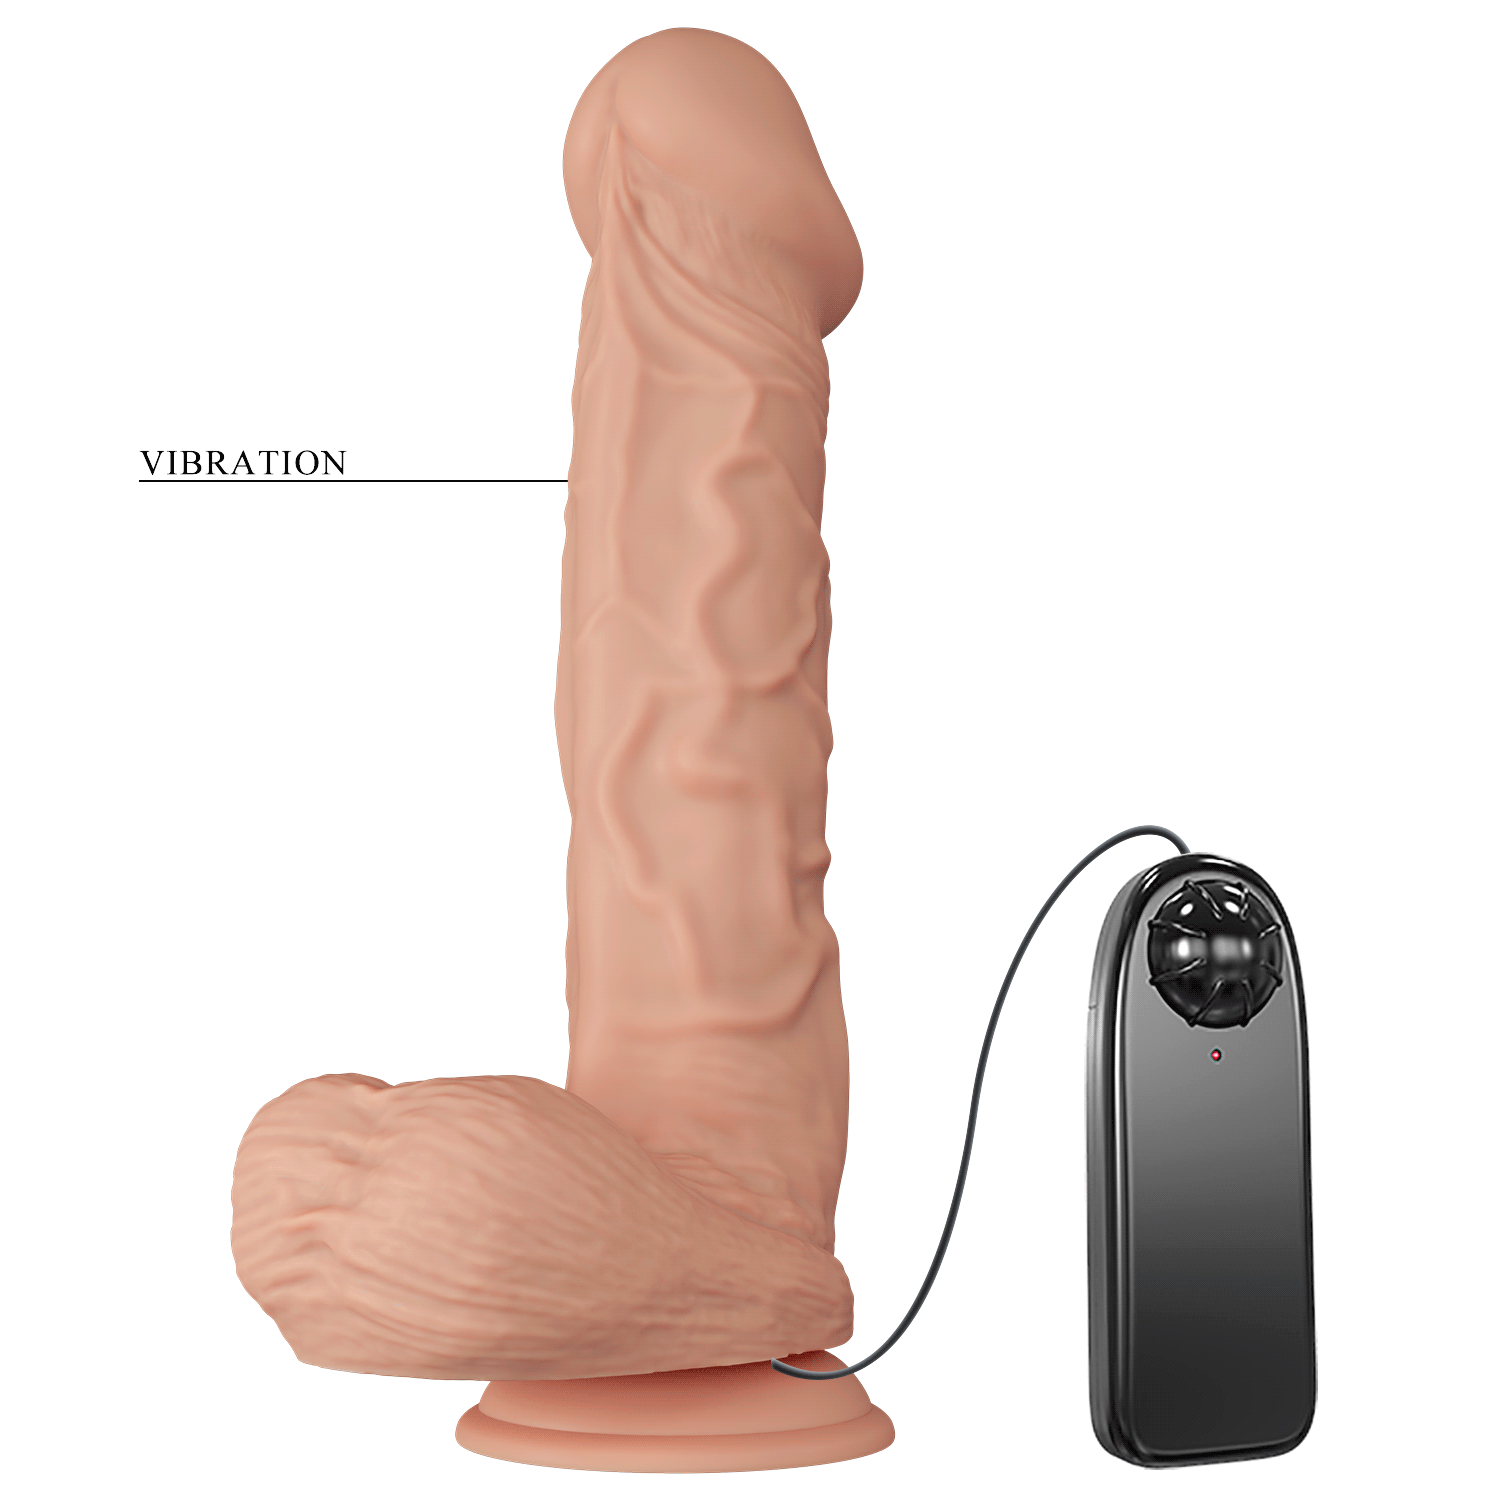 Baile 10.2 Inch Lifelike Vibrating Dildo with Suction Cup in Flesh